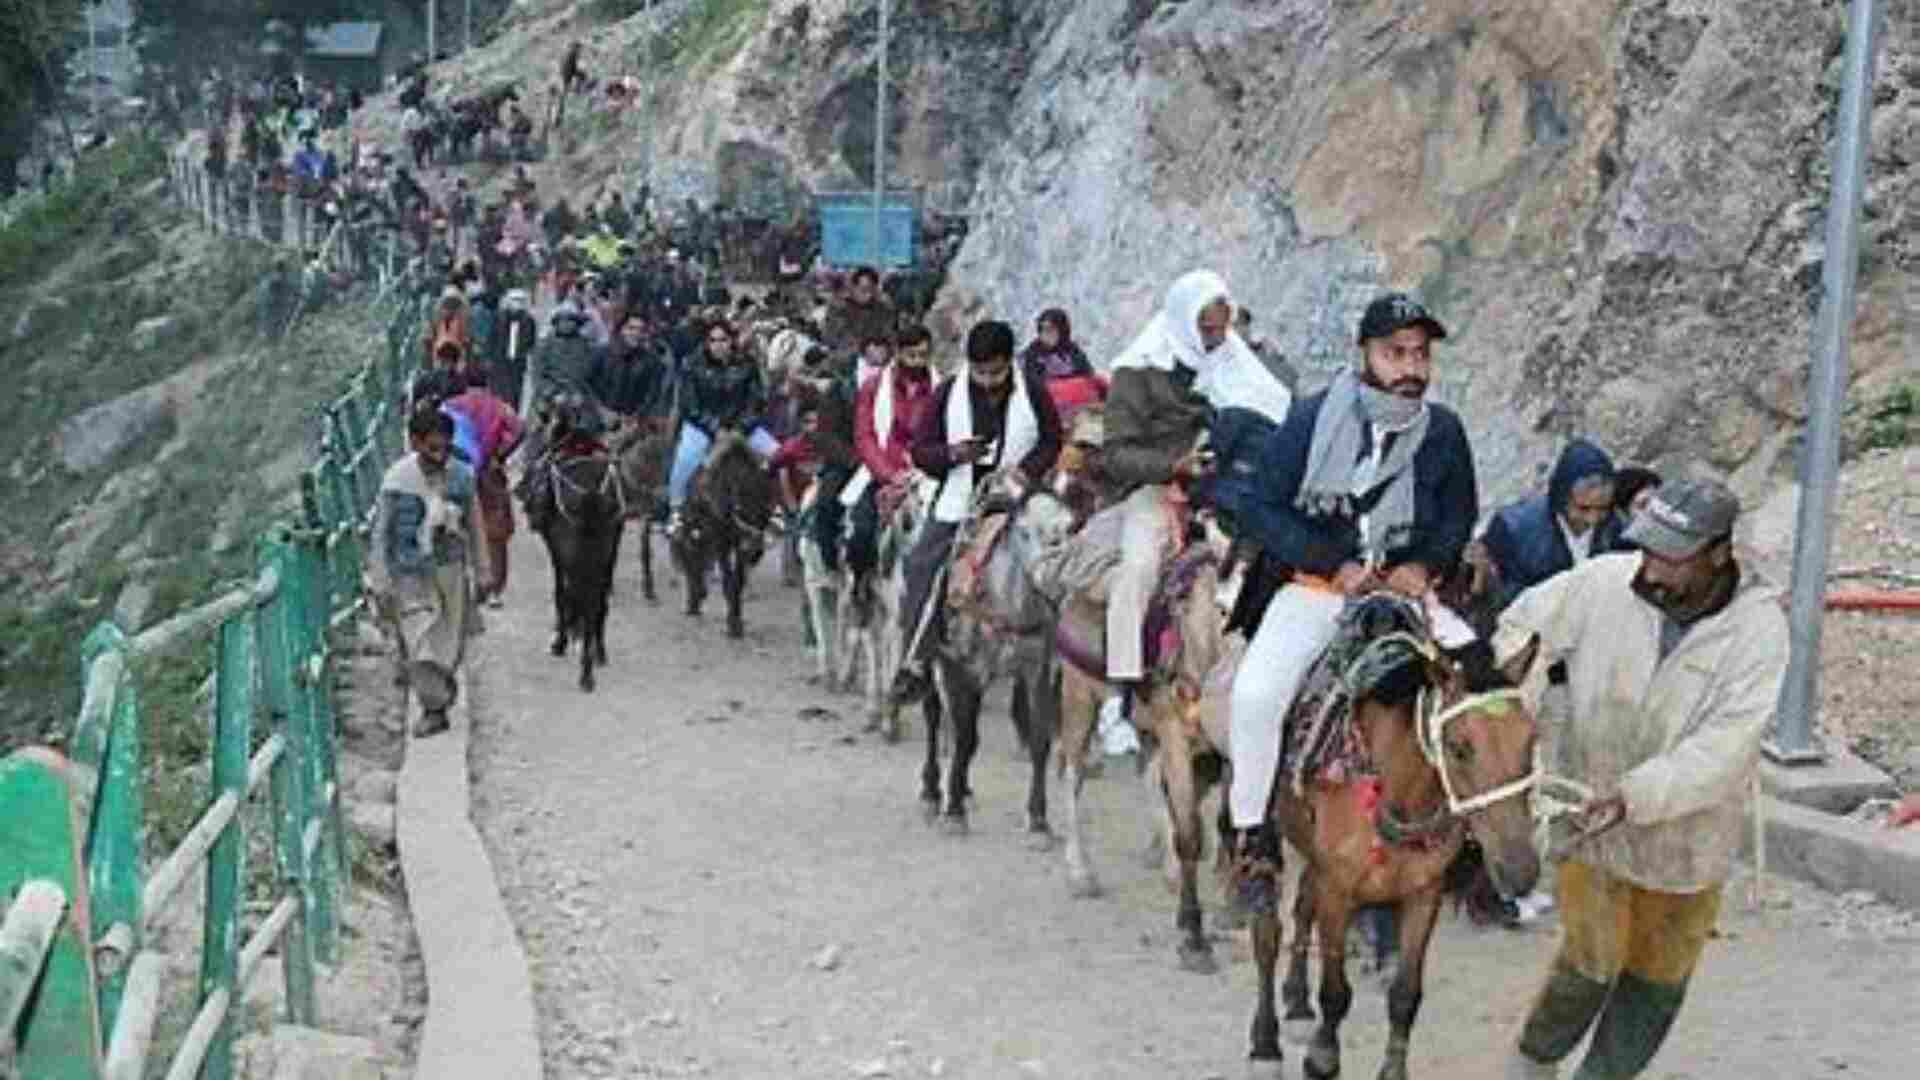 Jammu and Kashmir: New Batch of Pilgrims Sets Out for Amarnath Yatra with Tight Security